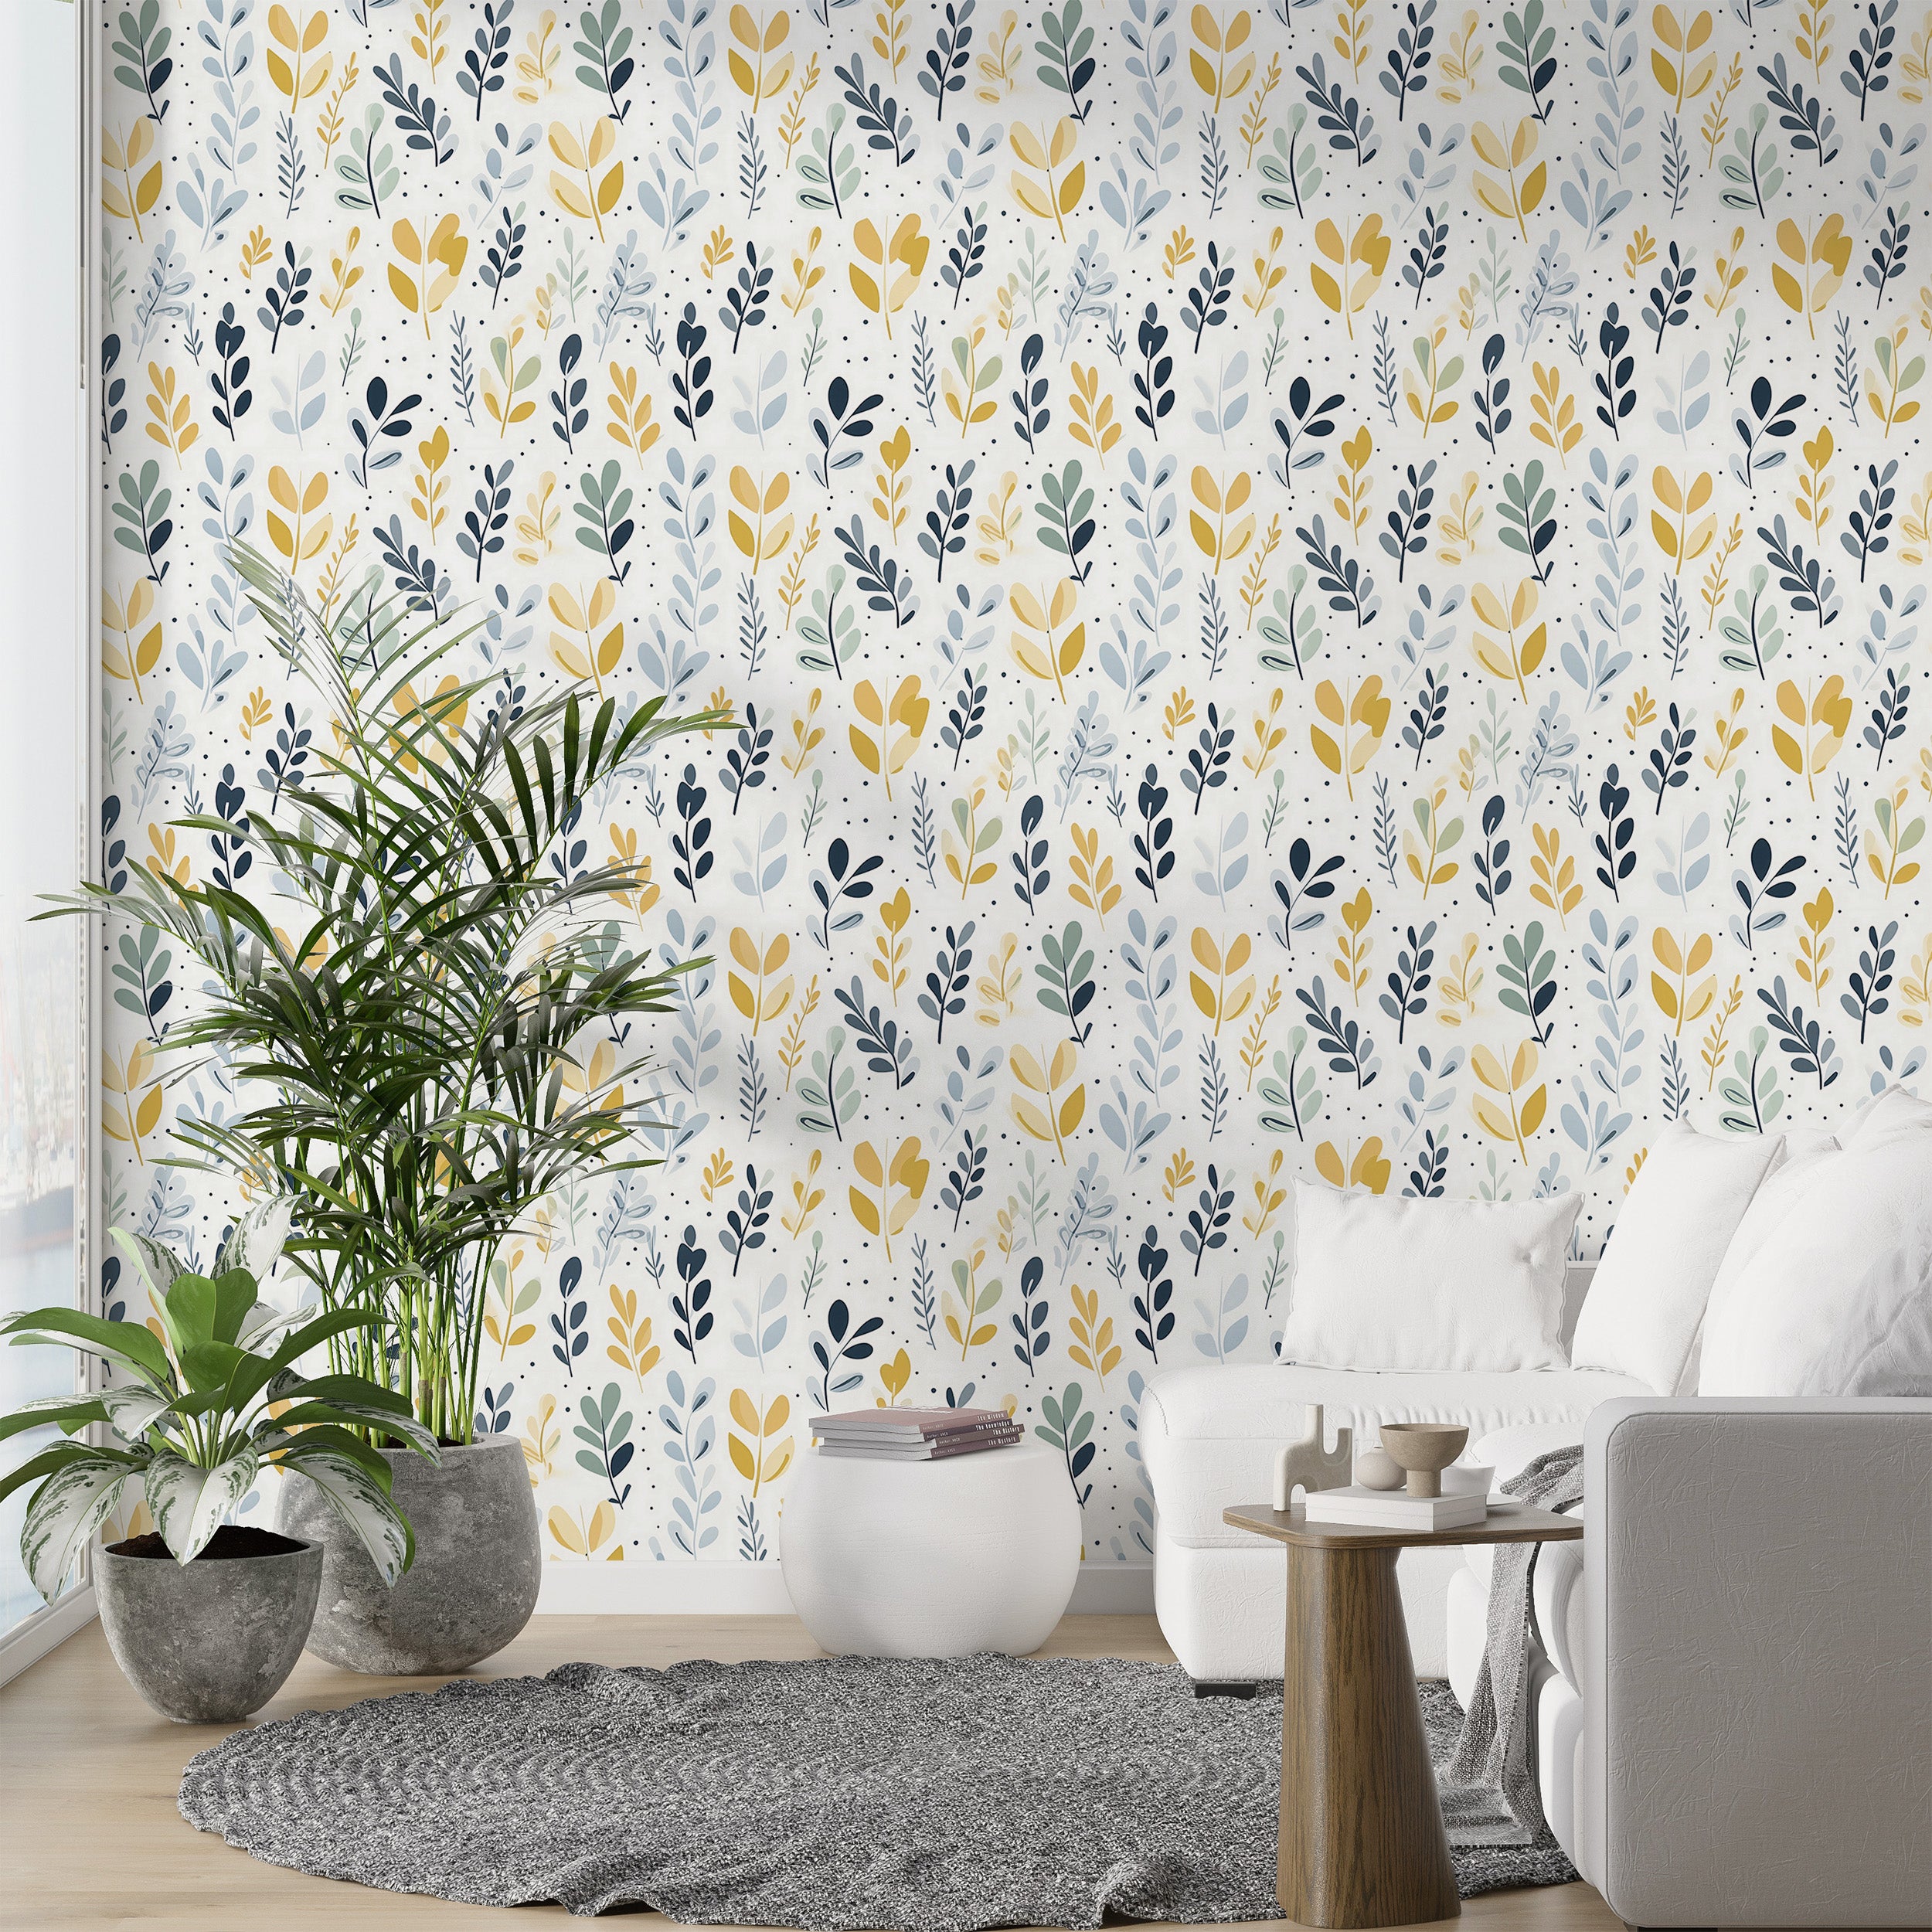 Effortless Application of Yellow Floral Mural